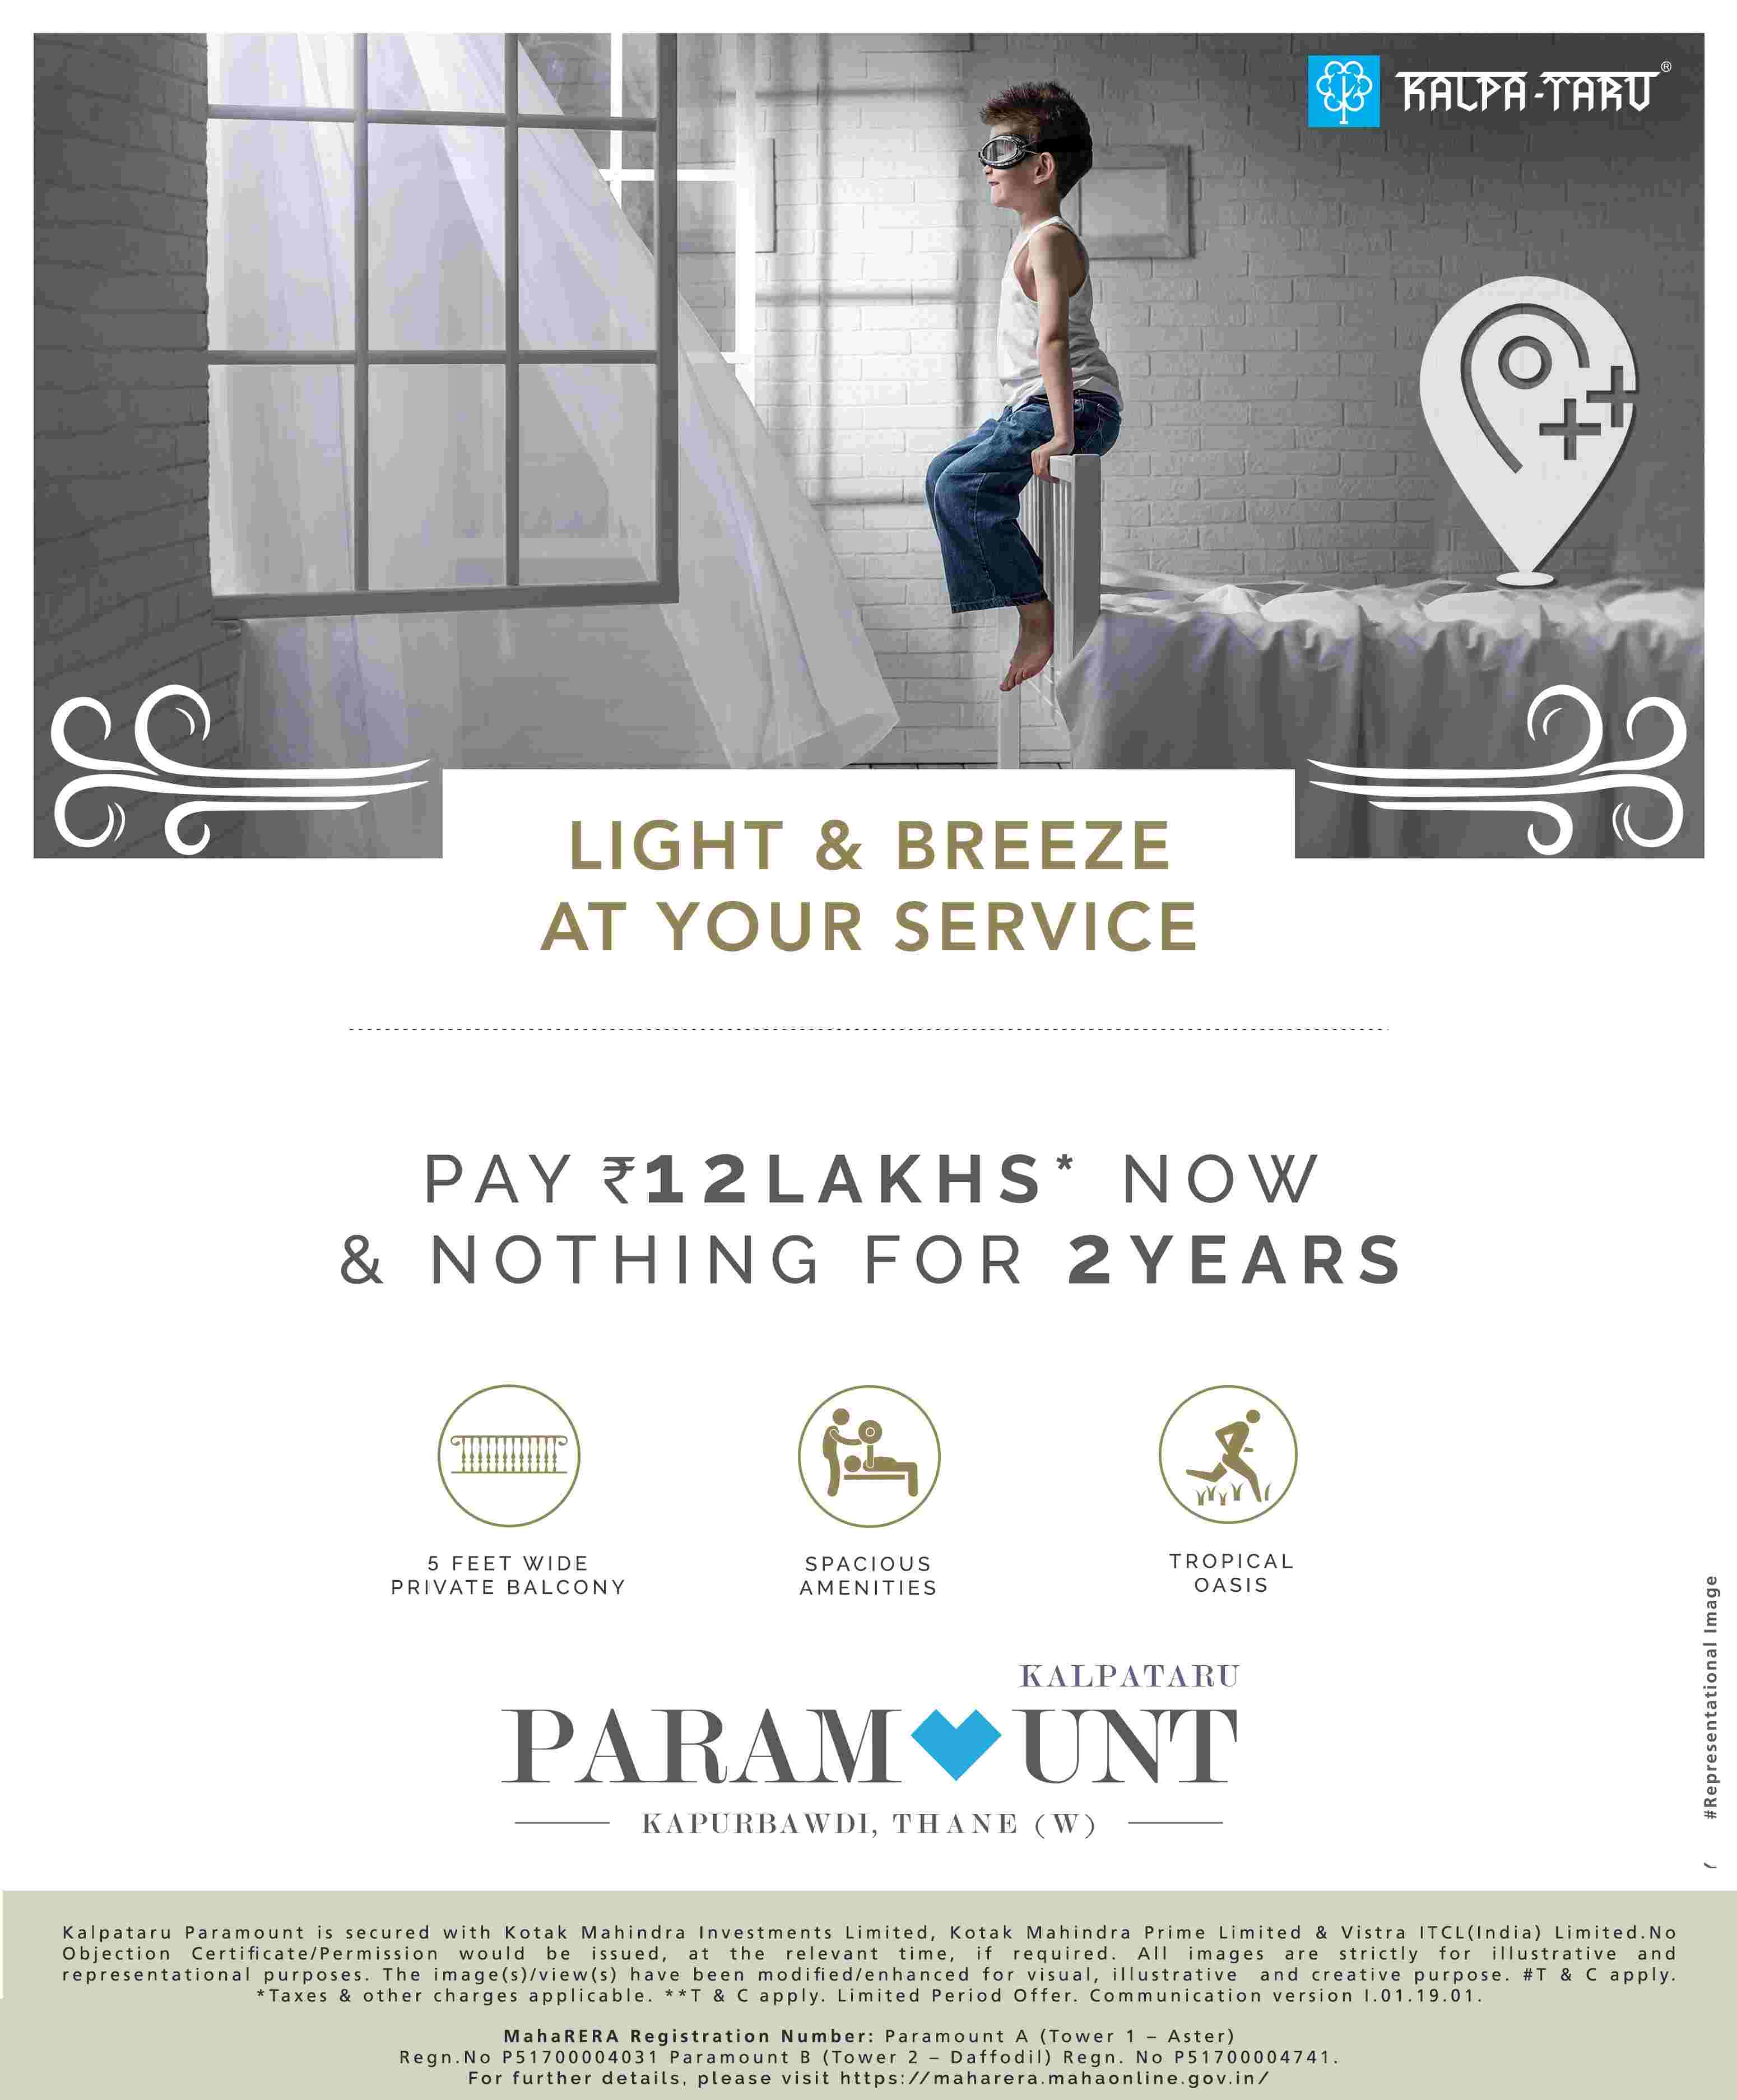 Pay Rs 12 Lakhs now and nothing for 2 years at Kalpataru Paramount in Thane West, Mumbai